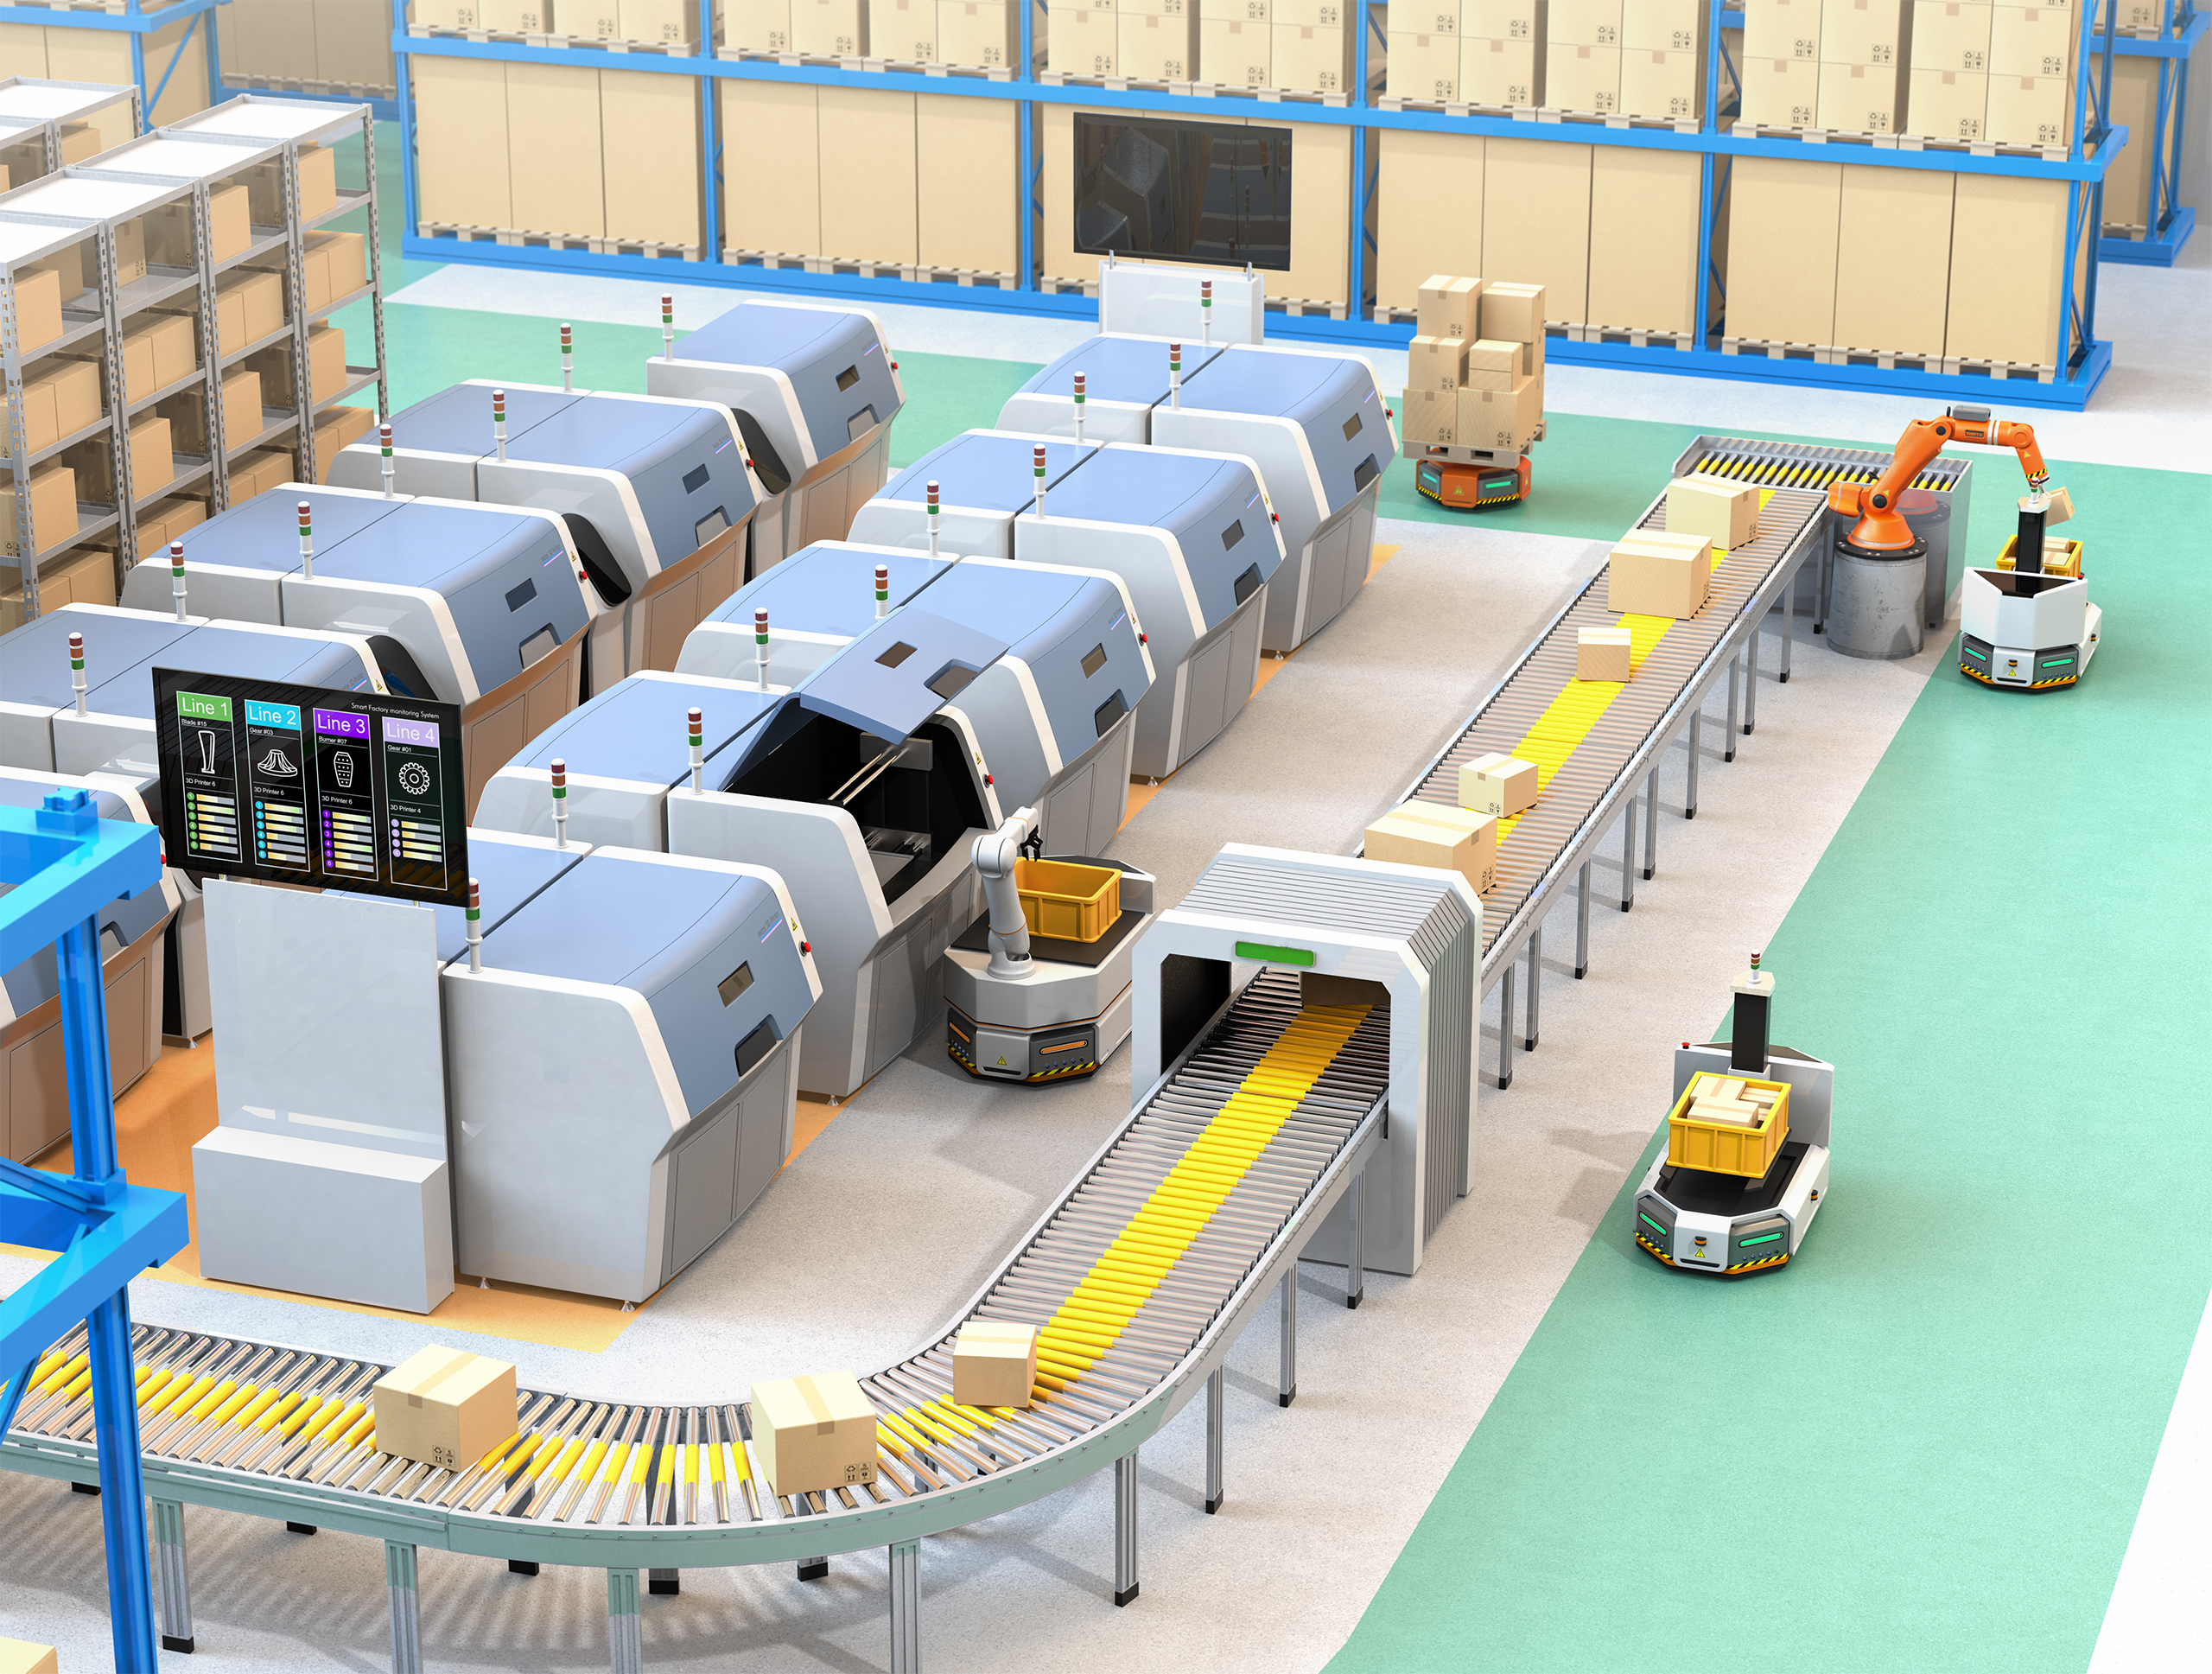 Smart factory equipped with AGV, robot carrier, 3D printers and robotic picking system. 3D rendering image.